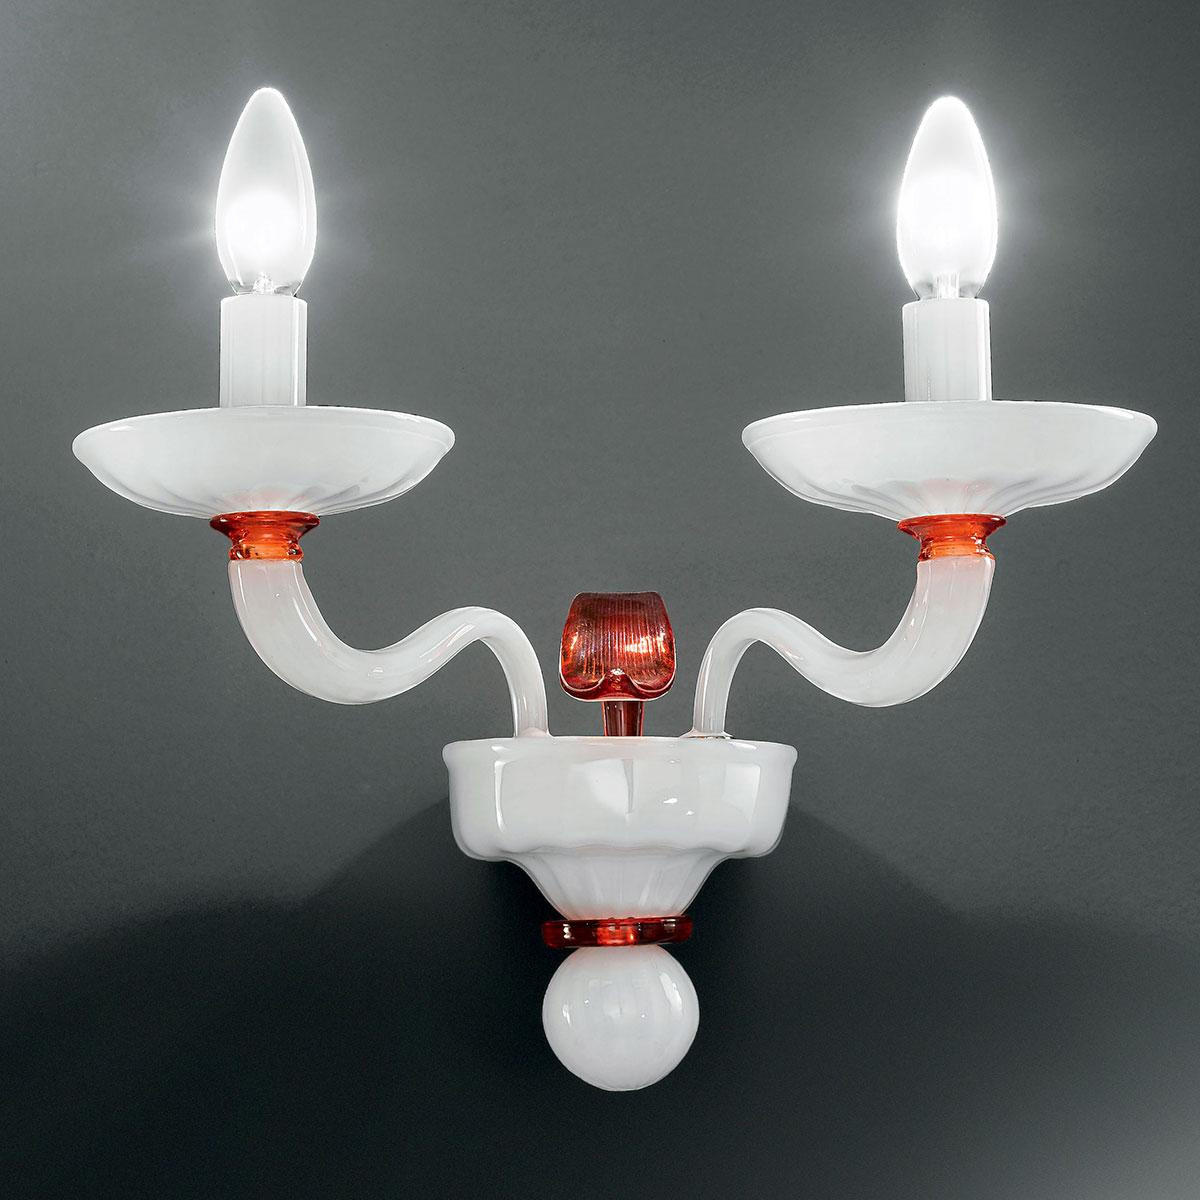 "Hypnos" Murano glass sconce - 2 lights - white and orange